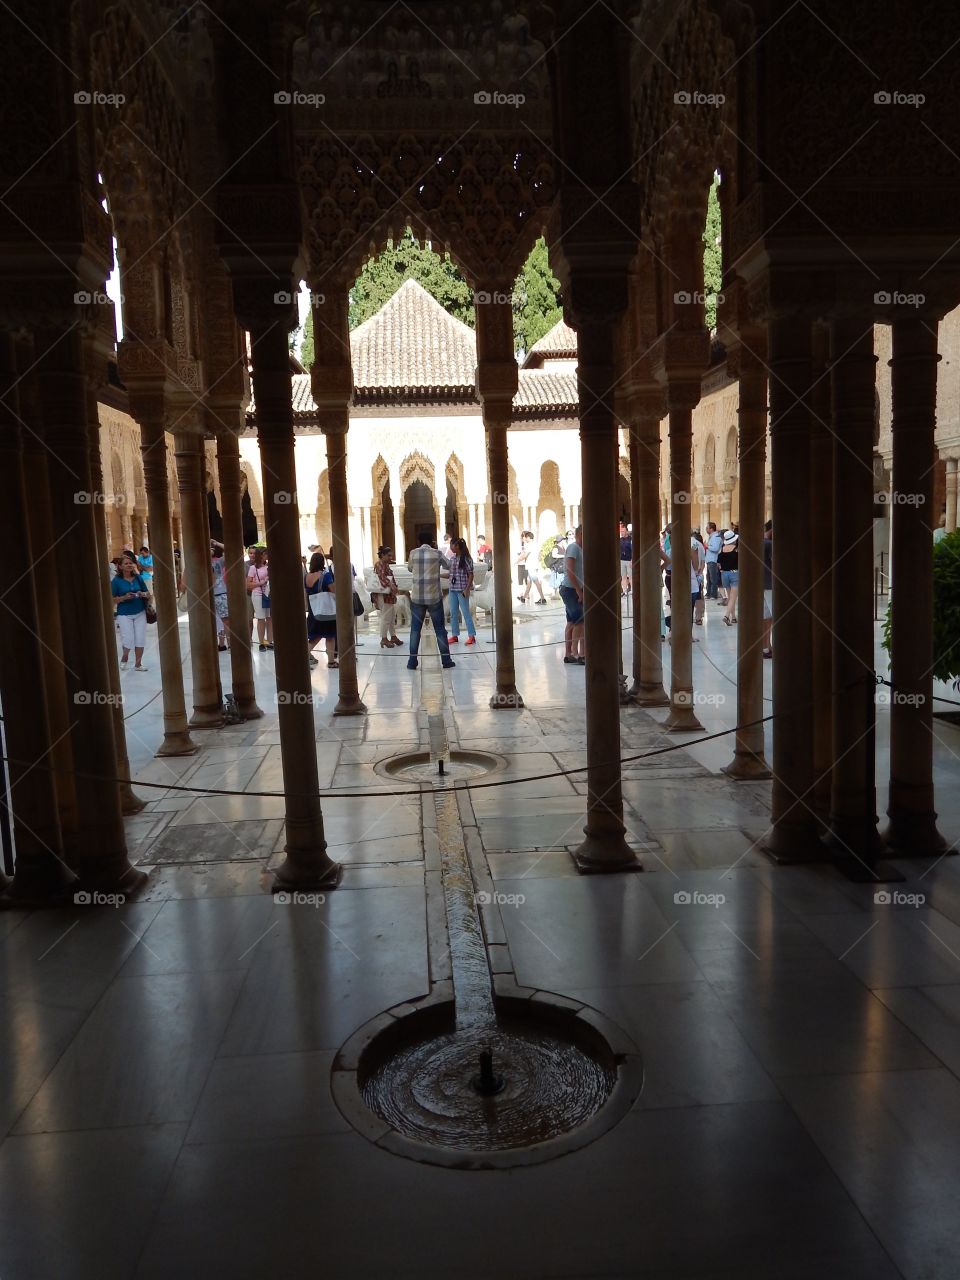 The palace of Alhambra 